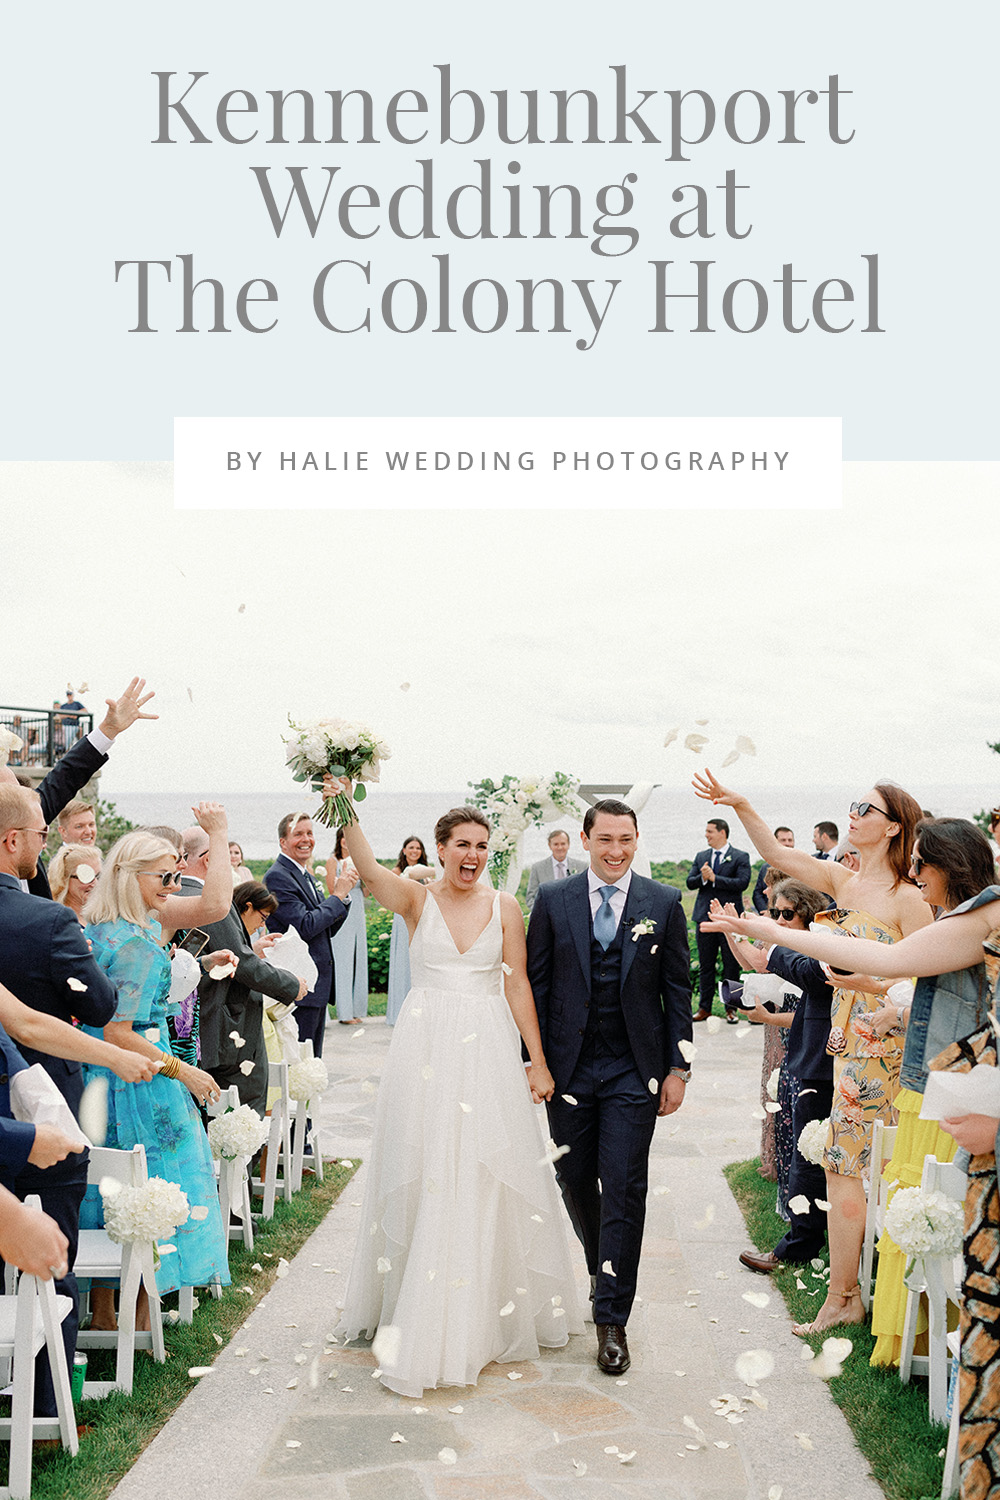 Kennebunkport Wedding at The Colony Hotel